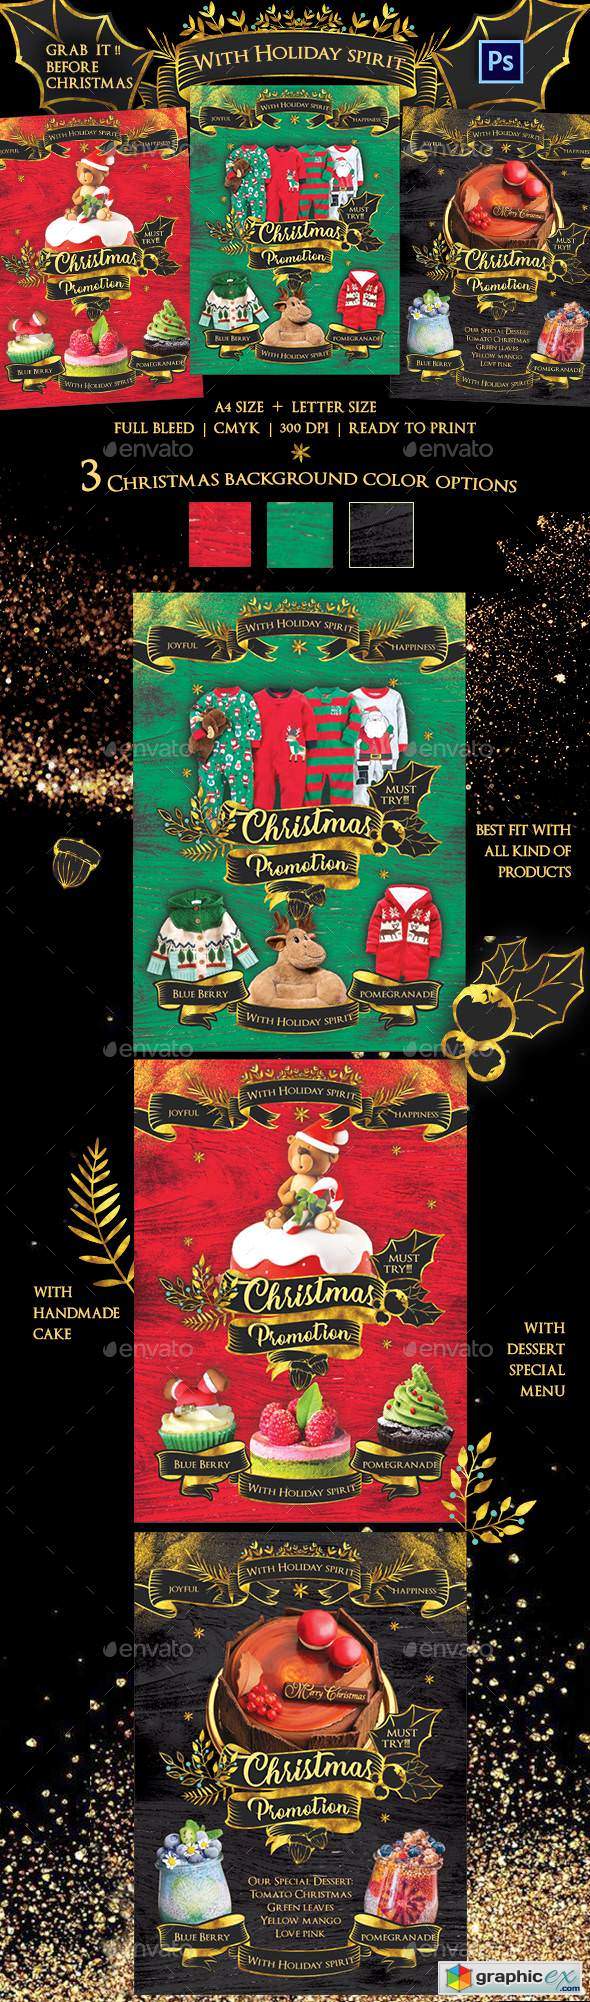 Christmas Promotion Flyer Template